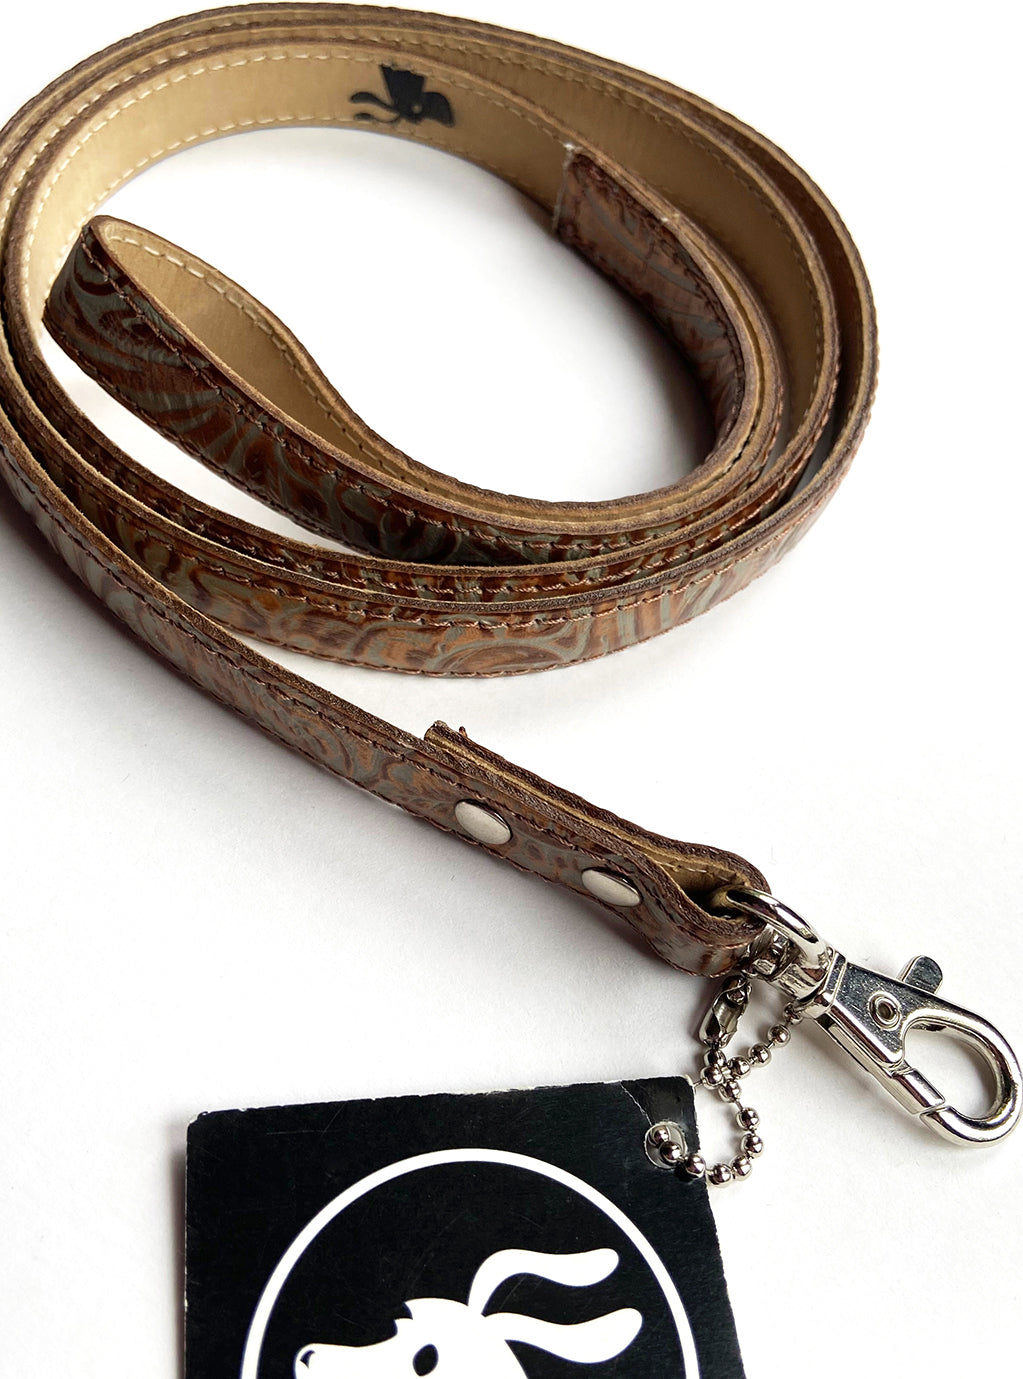 Wooftown French Leather Leash - Brown/Copper (5/8")